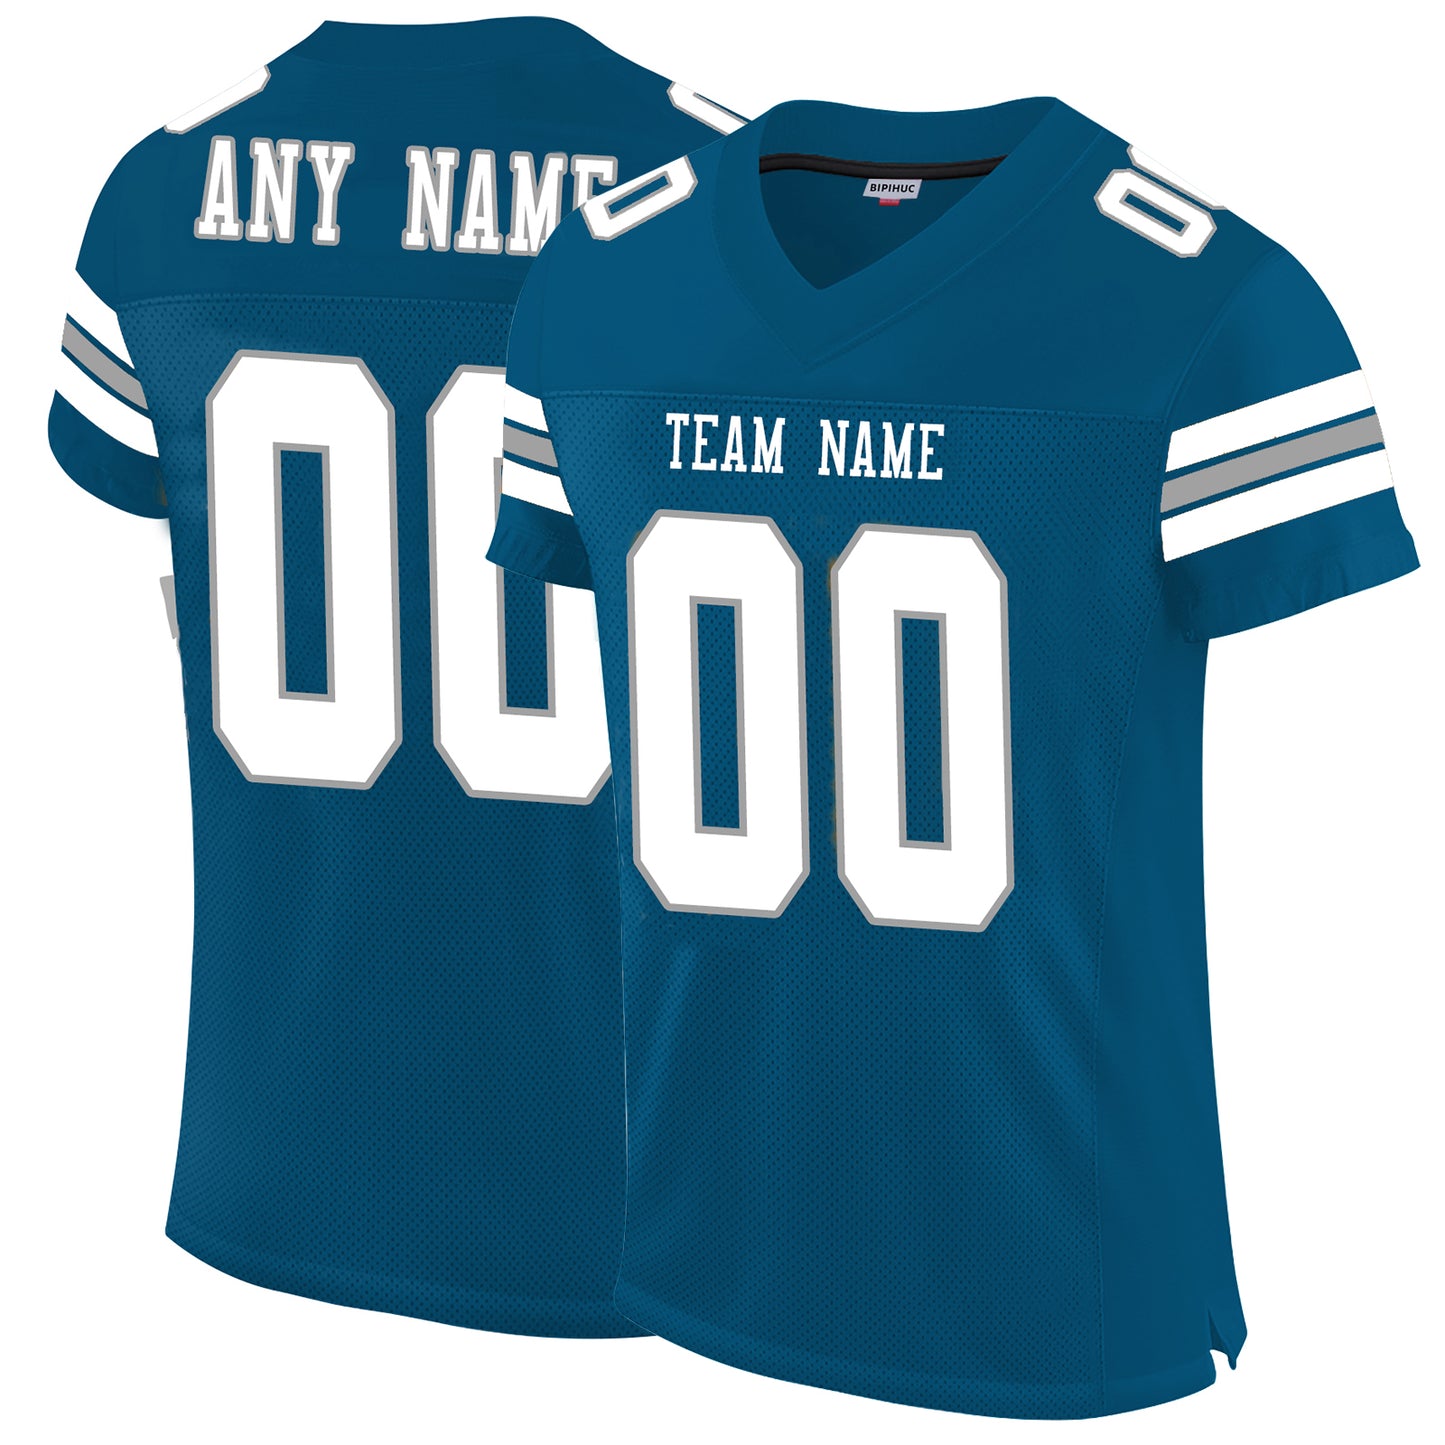 Custom Football Jersey for Men Women Youth Personalize Sports Shirt Design Blue Stitched Name And Number Size S to 6XL Christmas Birthday Gift